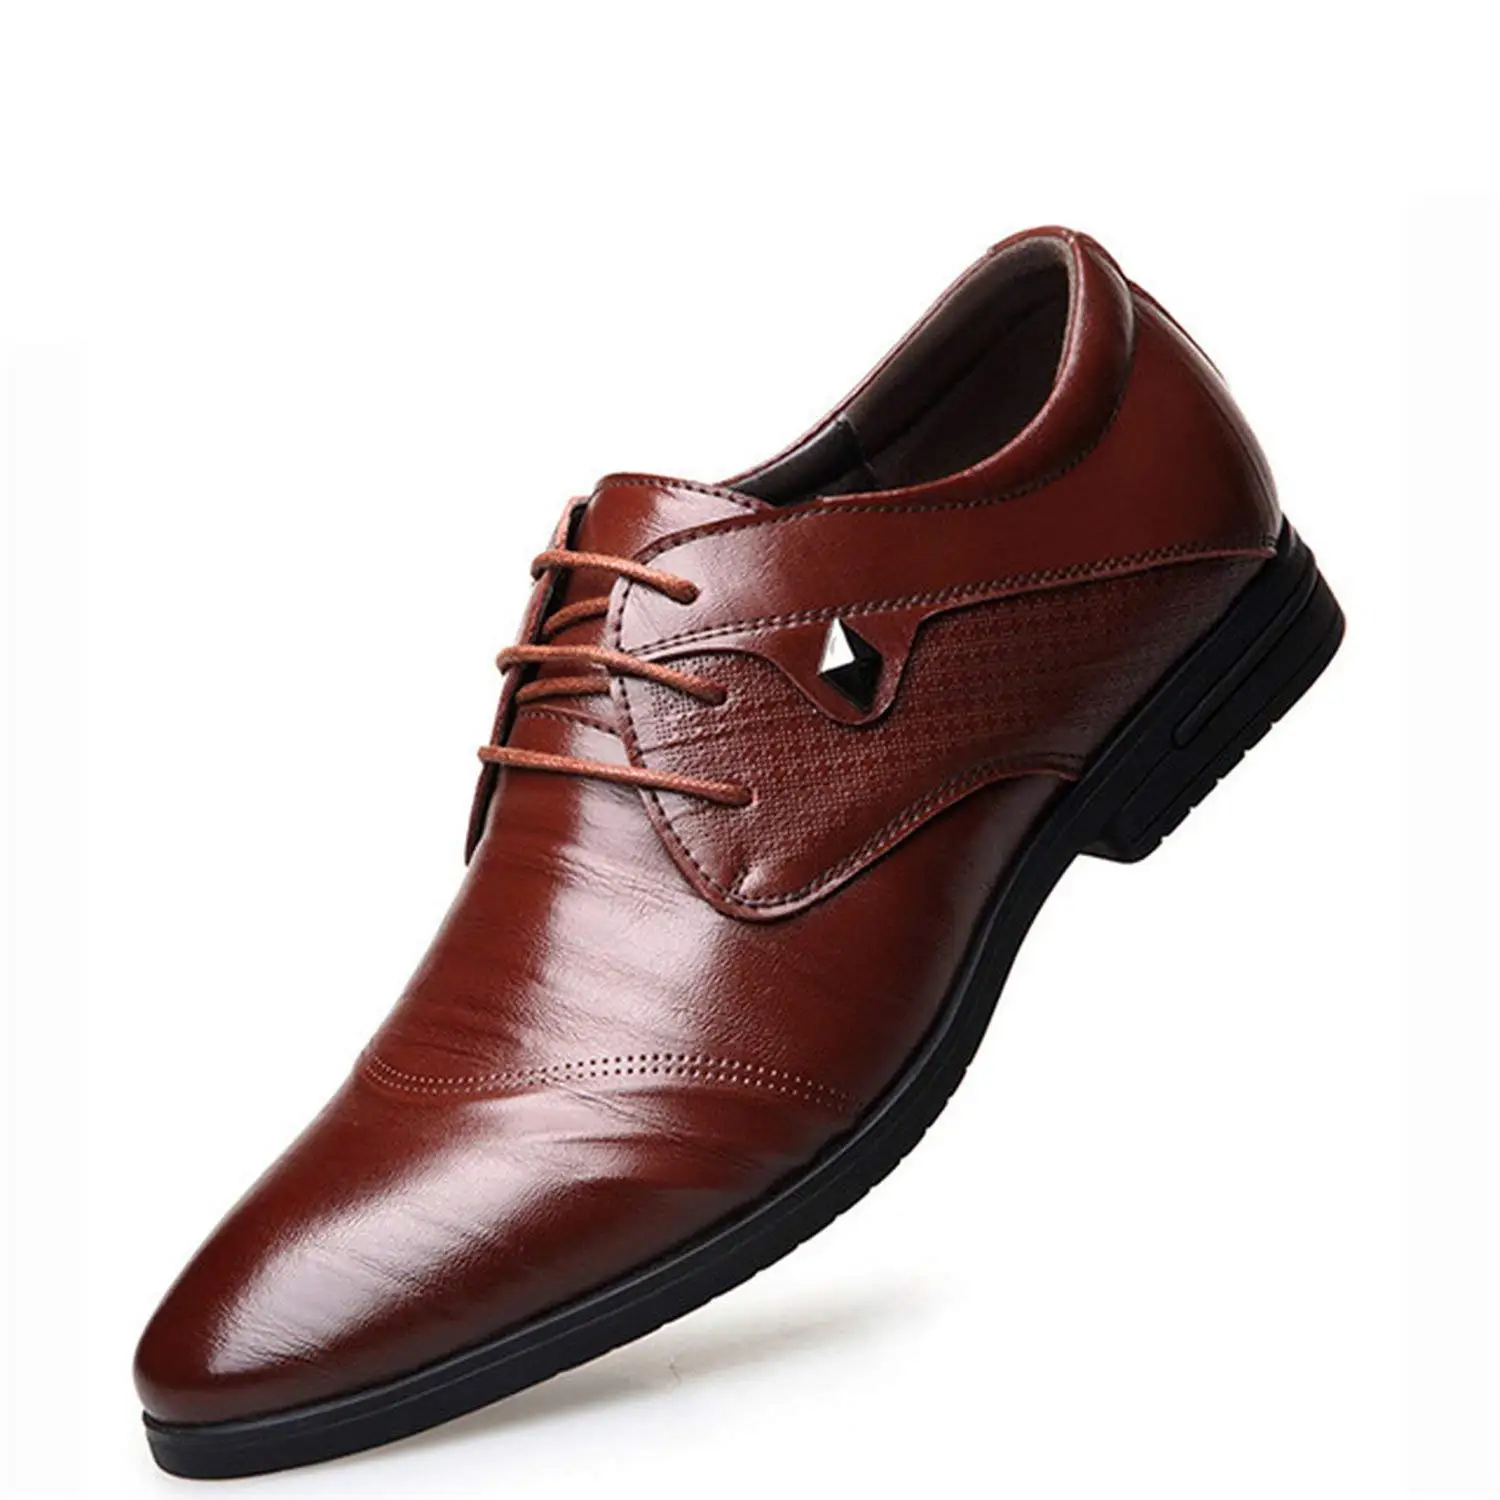 Cheap Brown Italian Shoes, find Brown Italian Shoes deals on line at ...